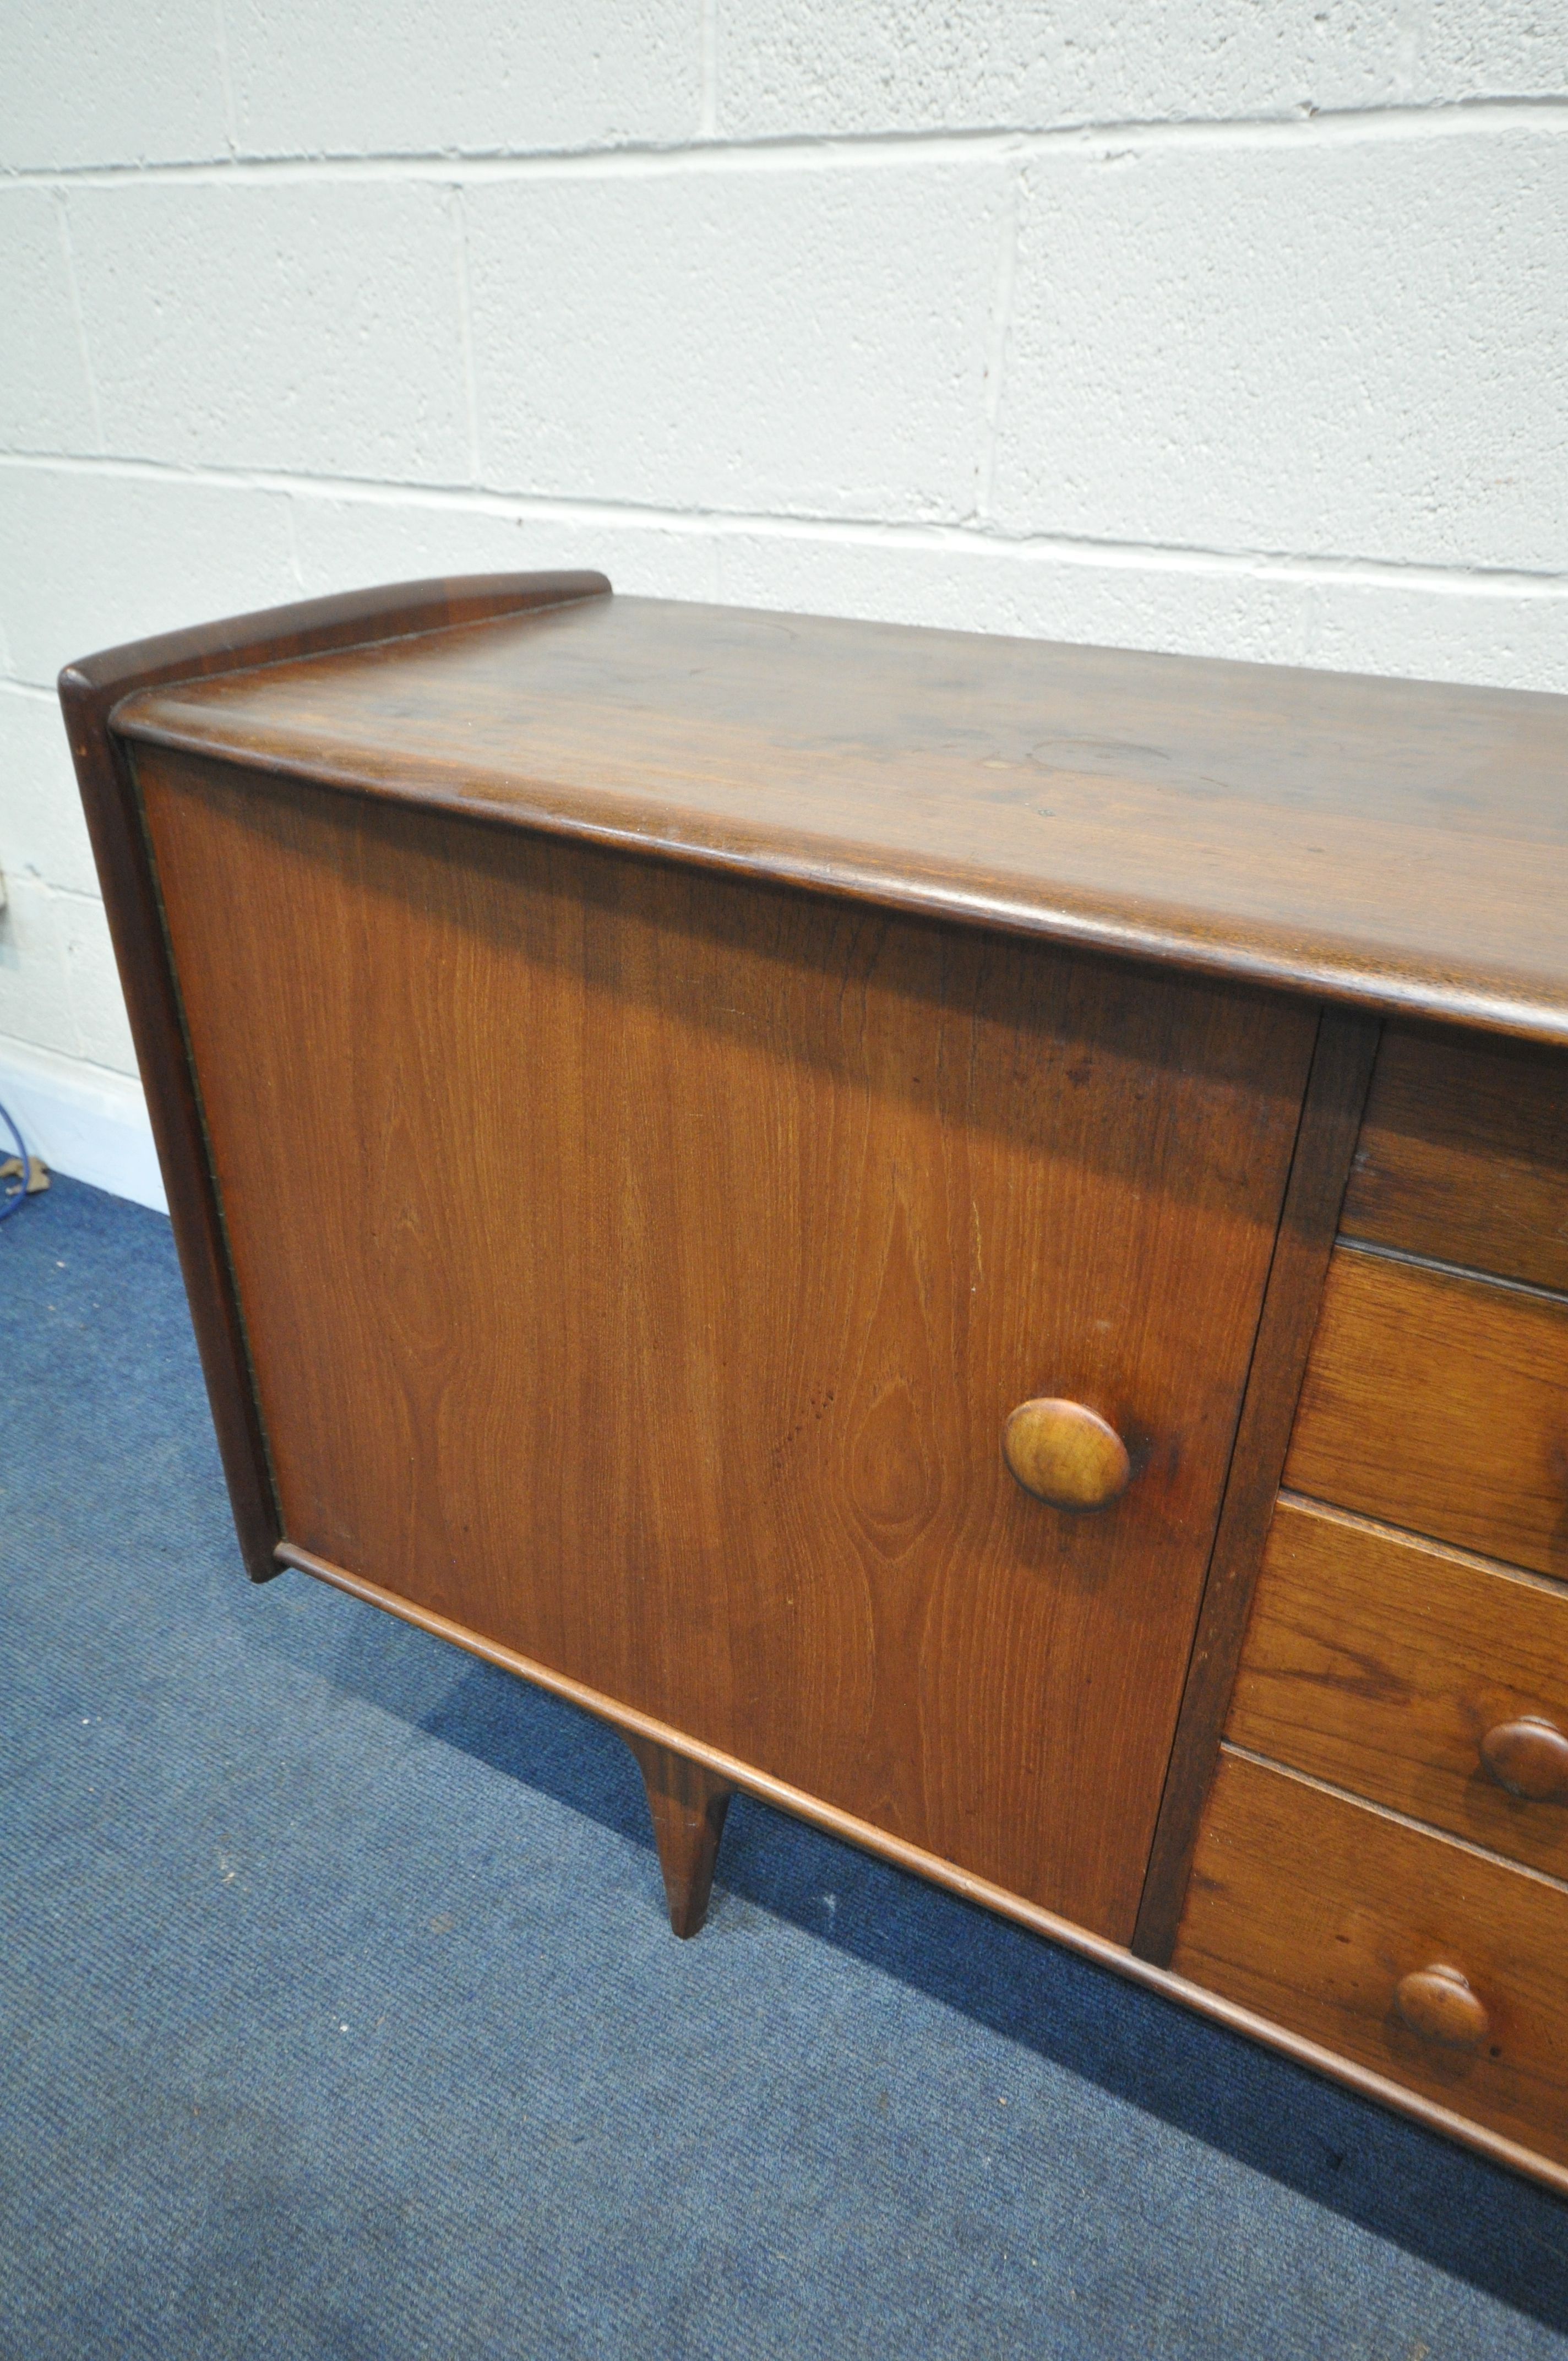 A MID CENTURY AFROMOSIA TEAK 'VOLNAY' SIDEBOARD, DESIGNED BY JOHN HERBERT FOR YOUNGER, with cupboard - Image 4 of 6